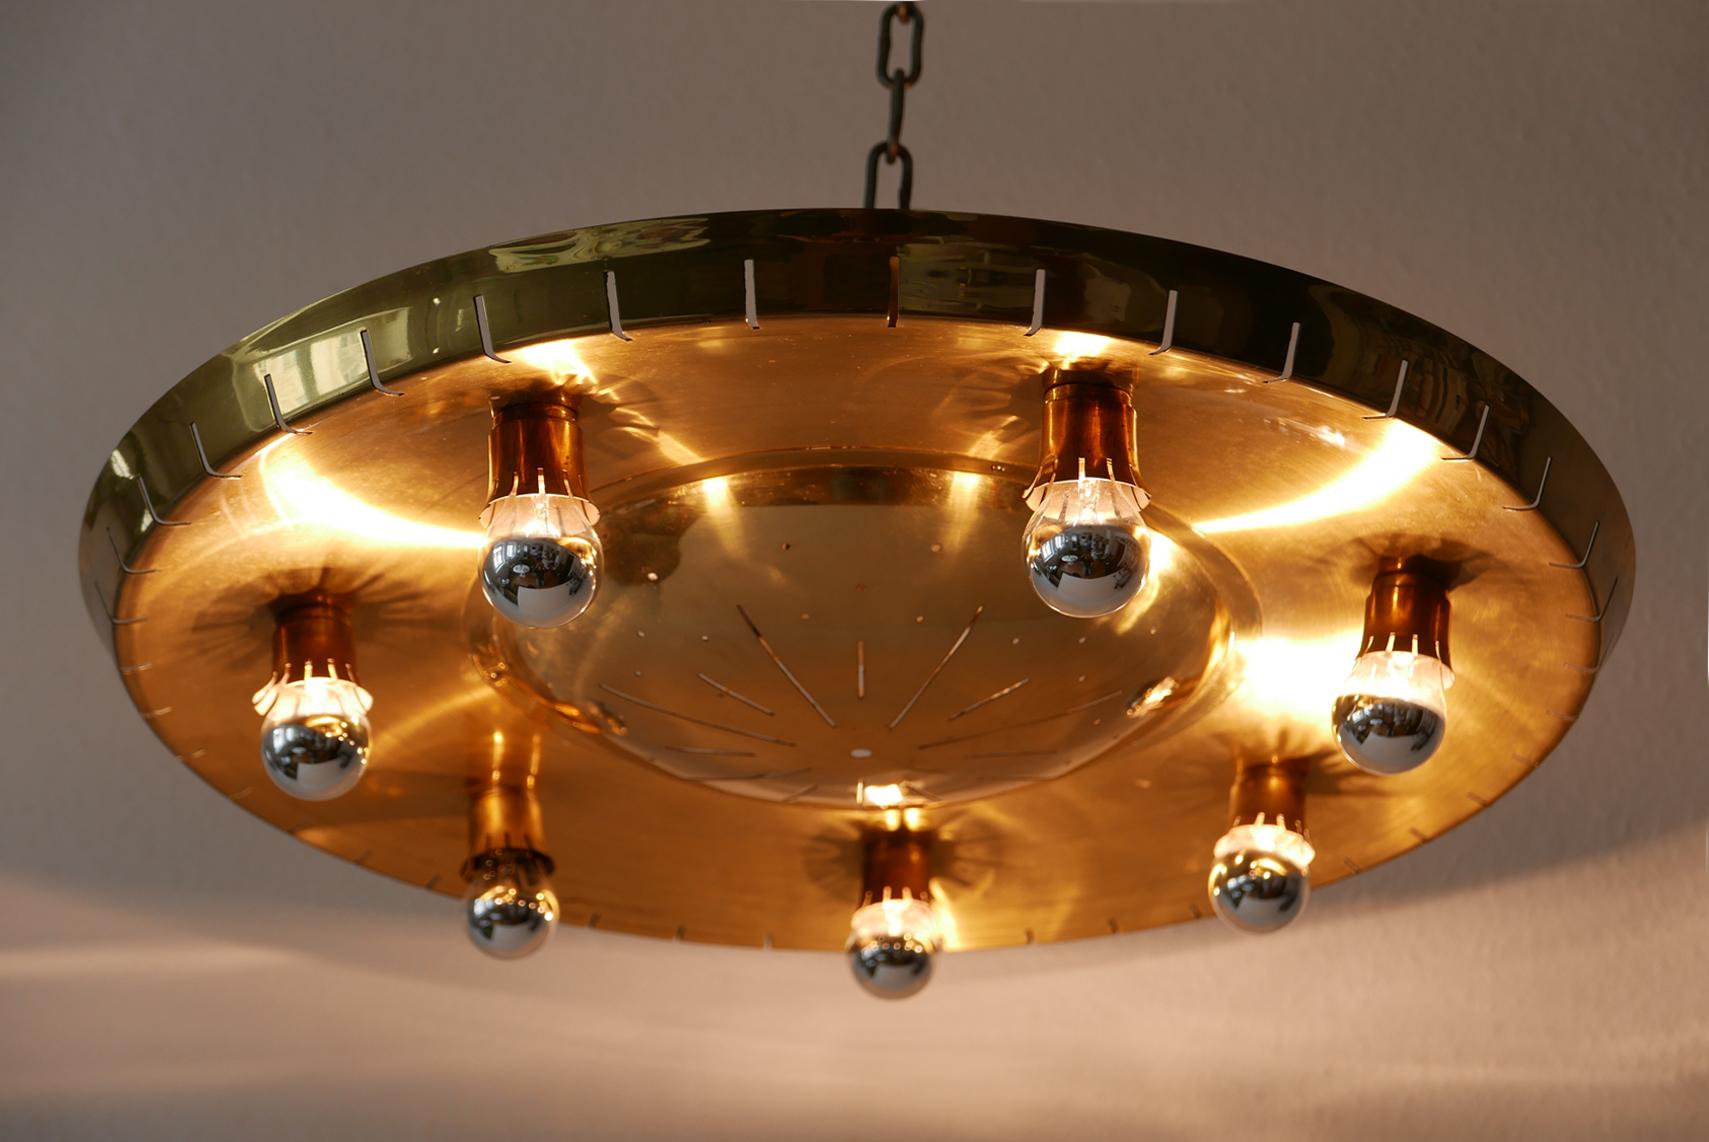 Exceptional Mid-Century Modern flush mount or ceiling fixture. Designed probably by Günter Trieschmann, 1950s, Stuttgart, Germany

Executed in brass, the ceiling fixture needs 11 x E14 Edison screw fit bulbs, is wired, and in working condition. It